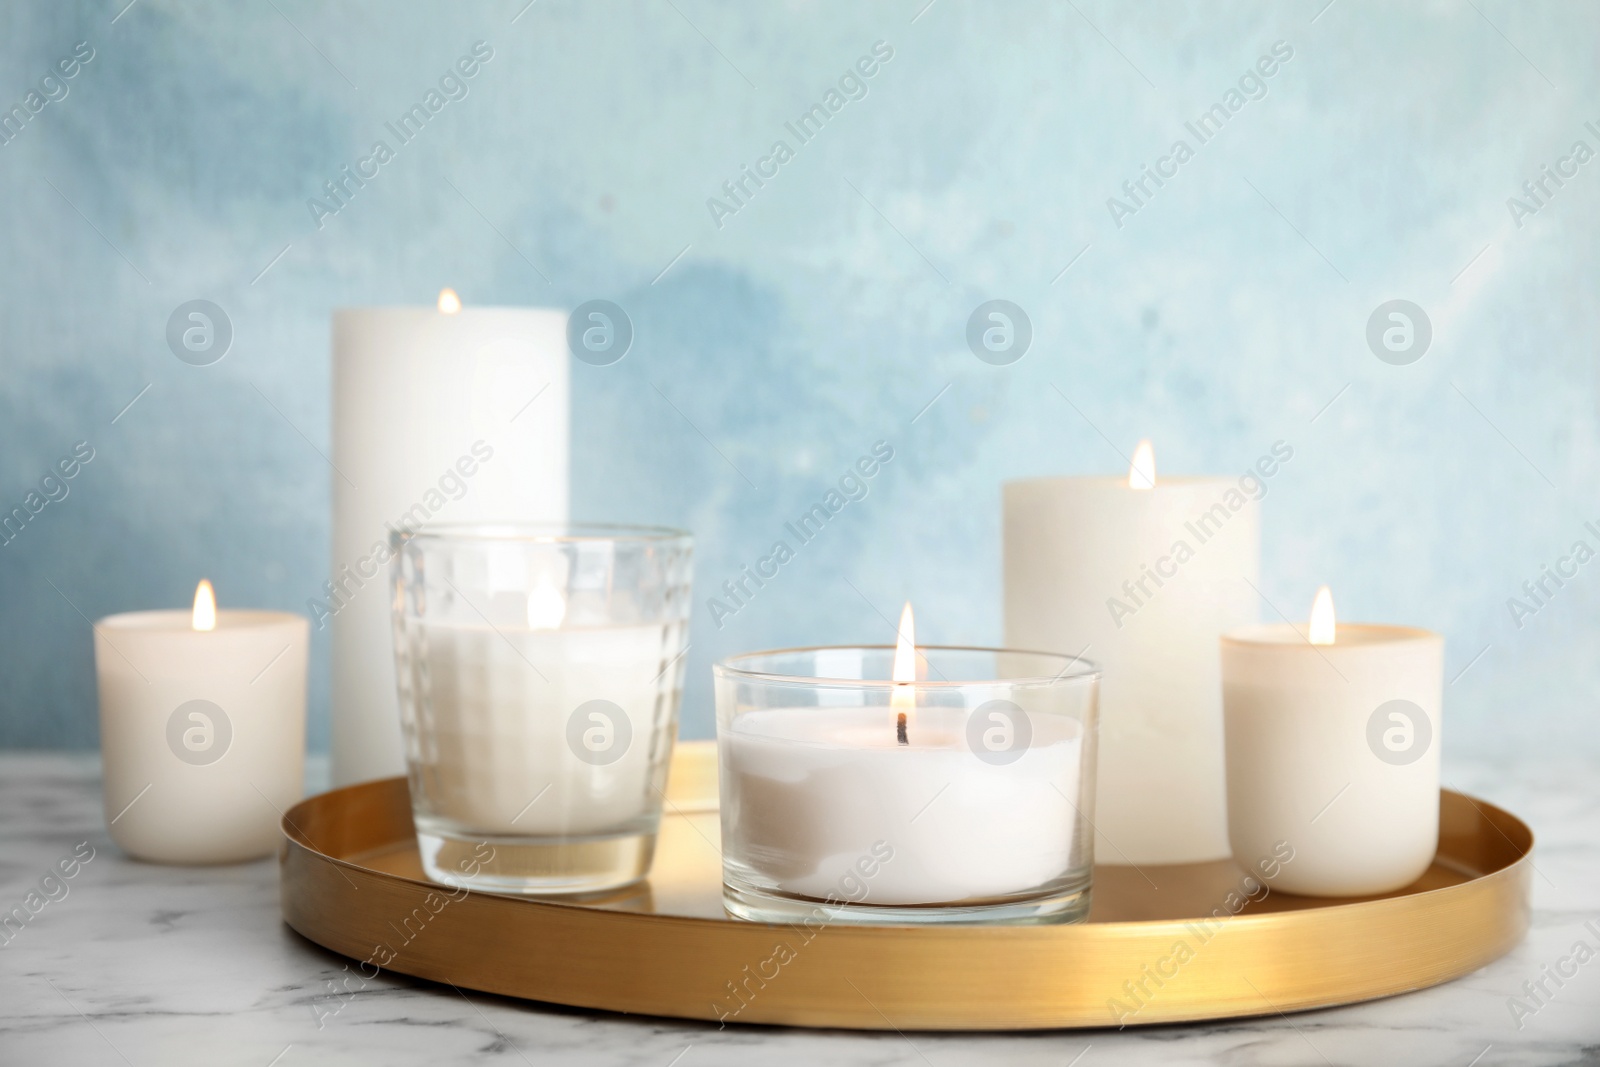 Photo of Tray with burning aromatic candles on table